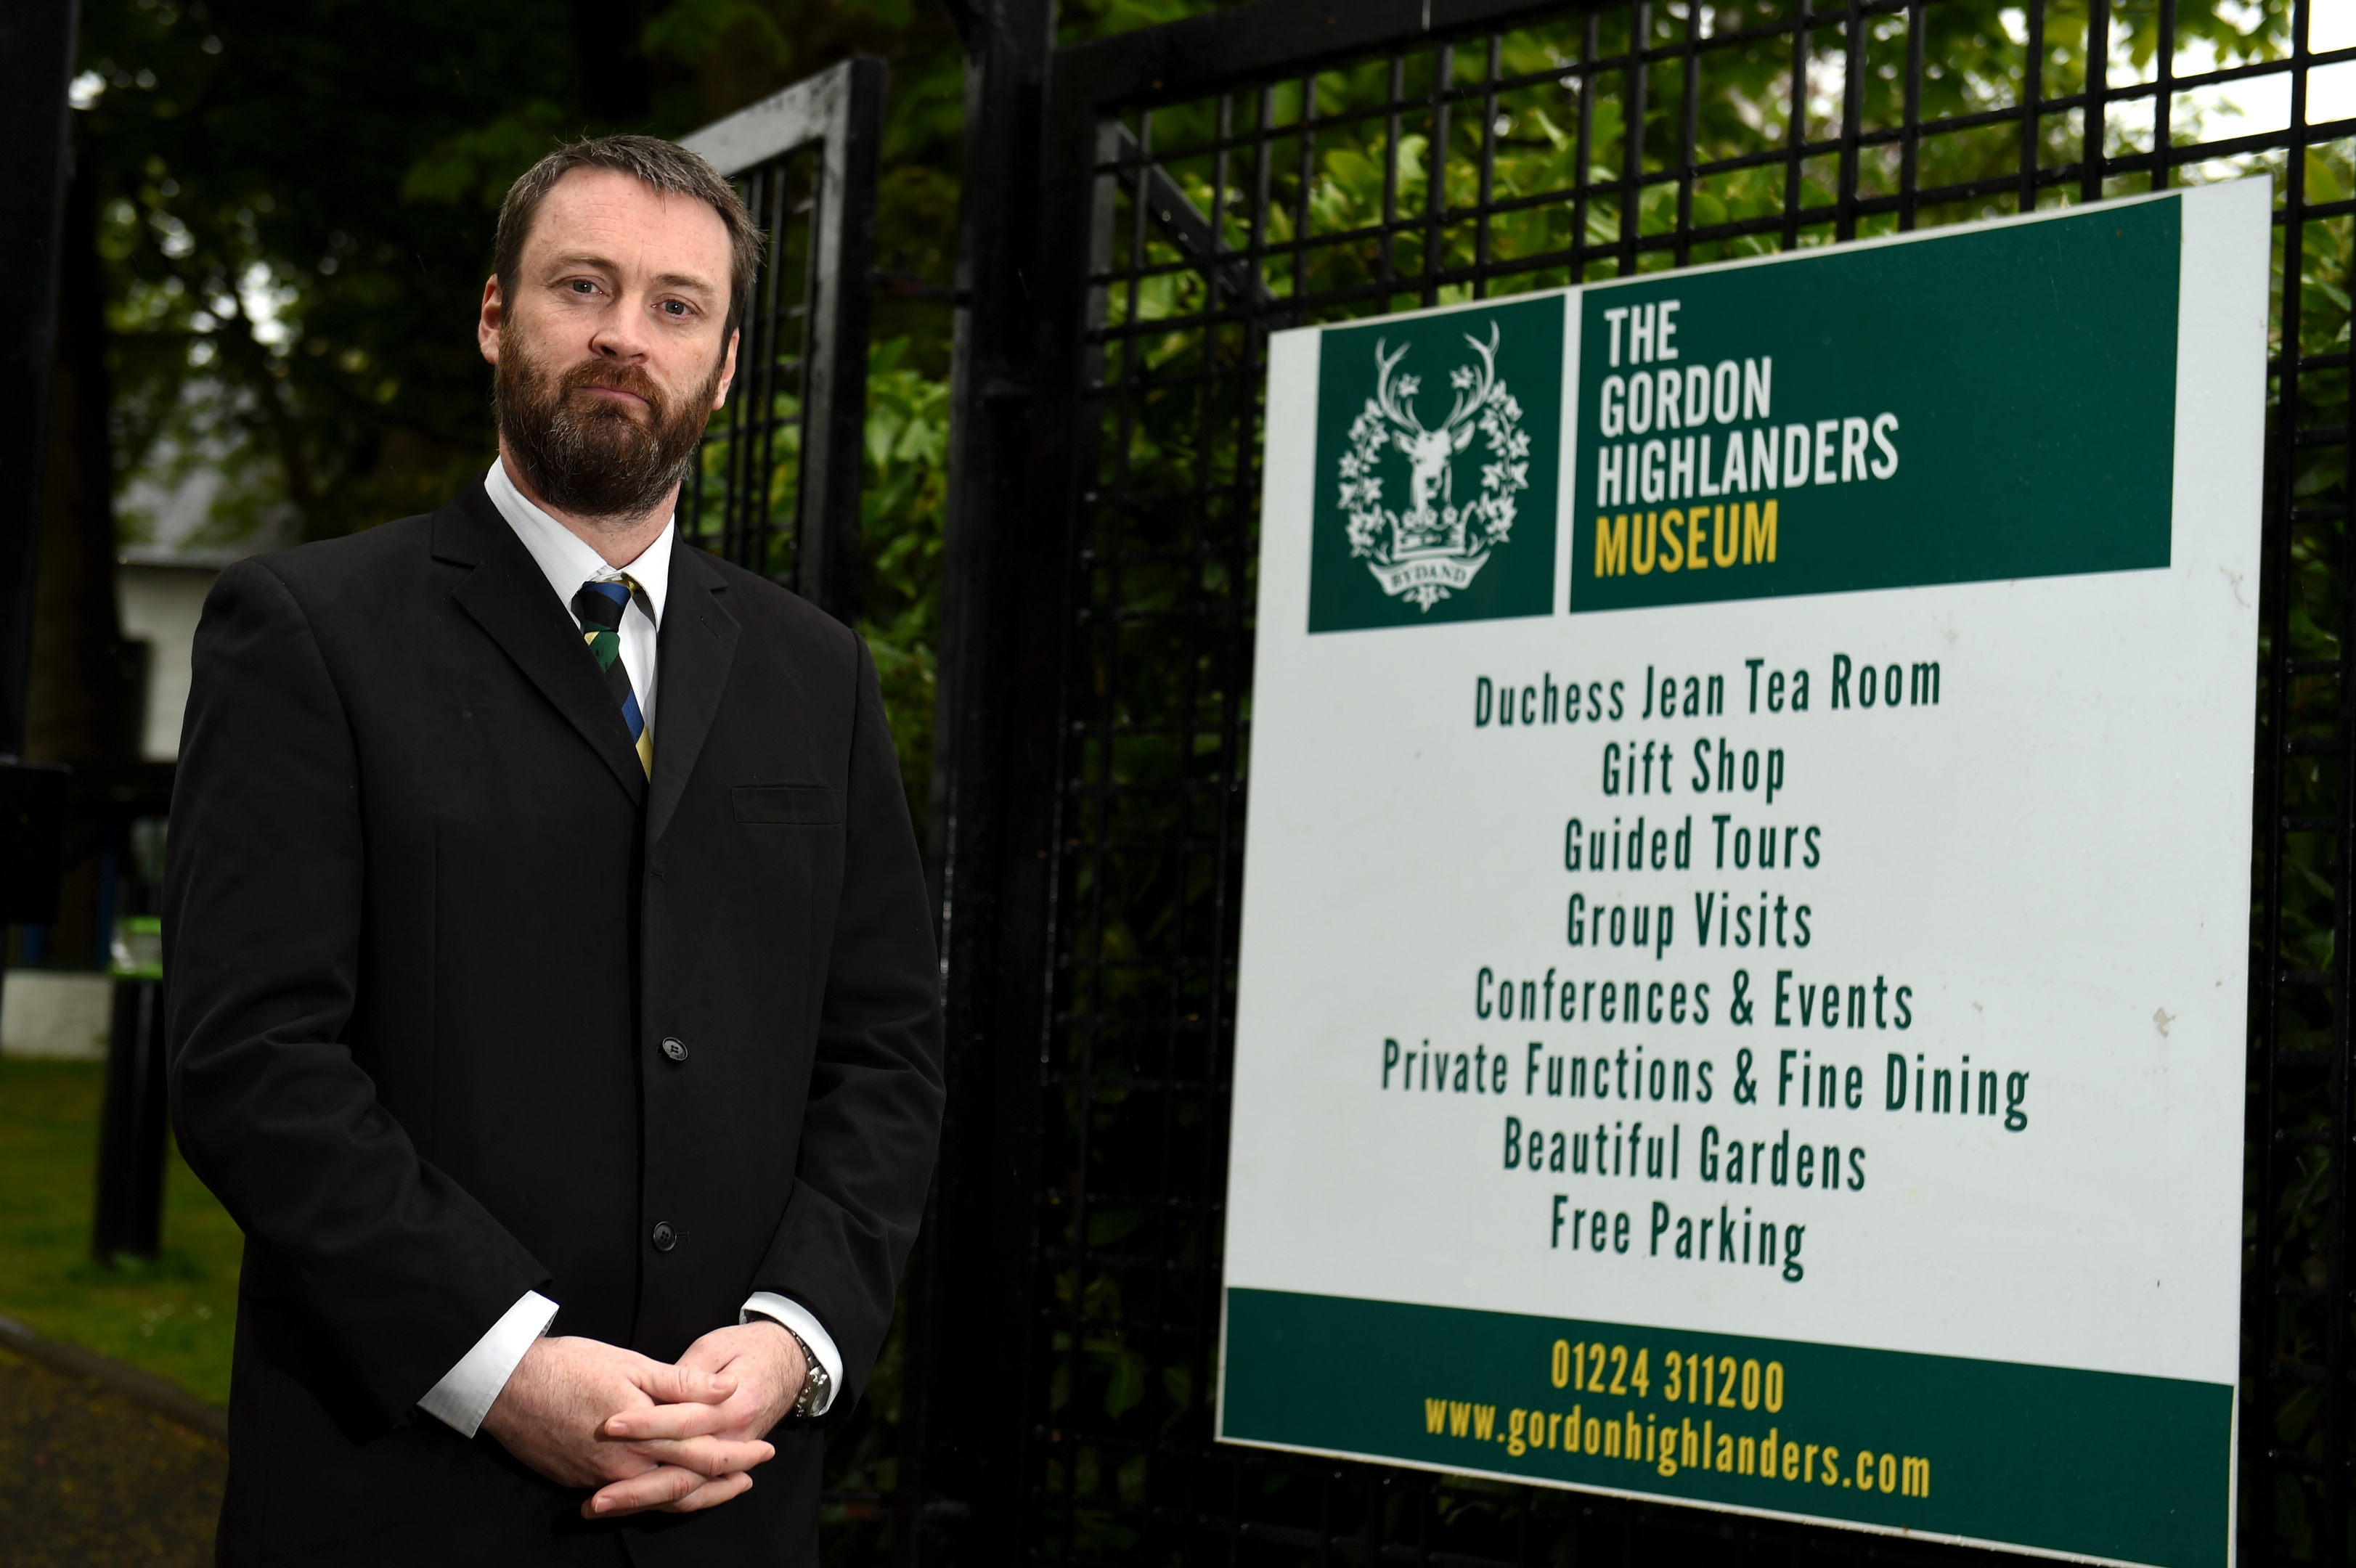 The museum's chief executive, Bryan Snelling